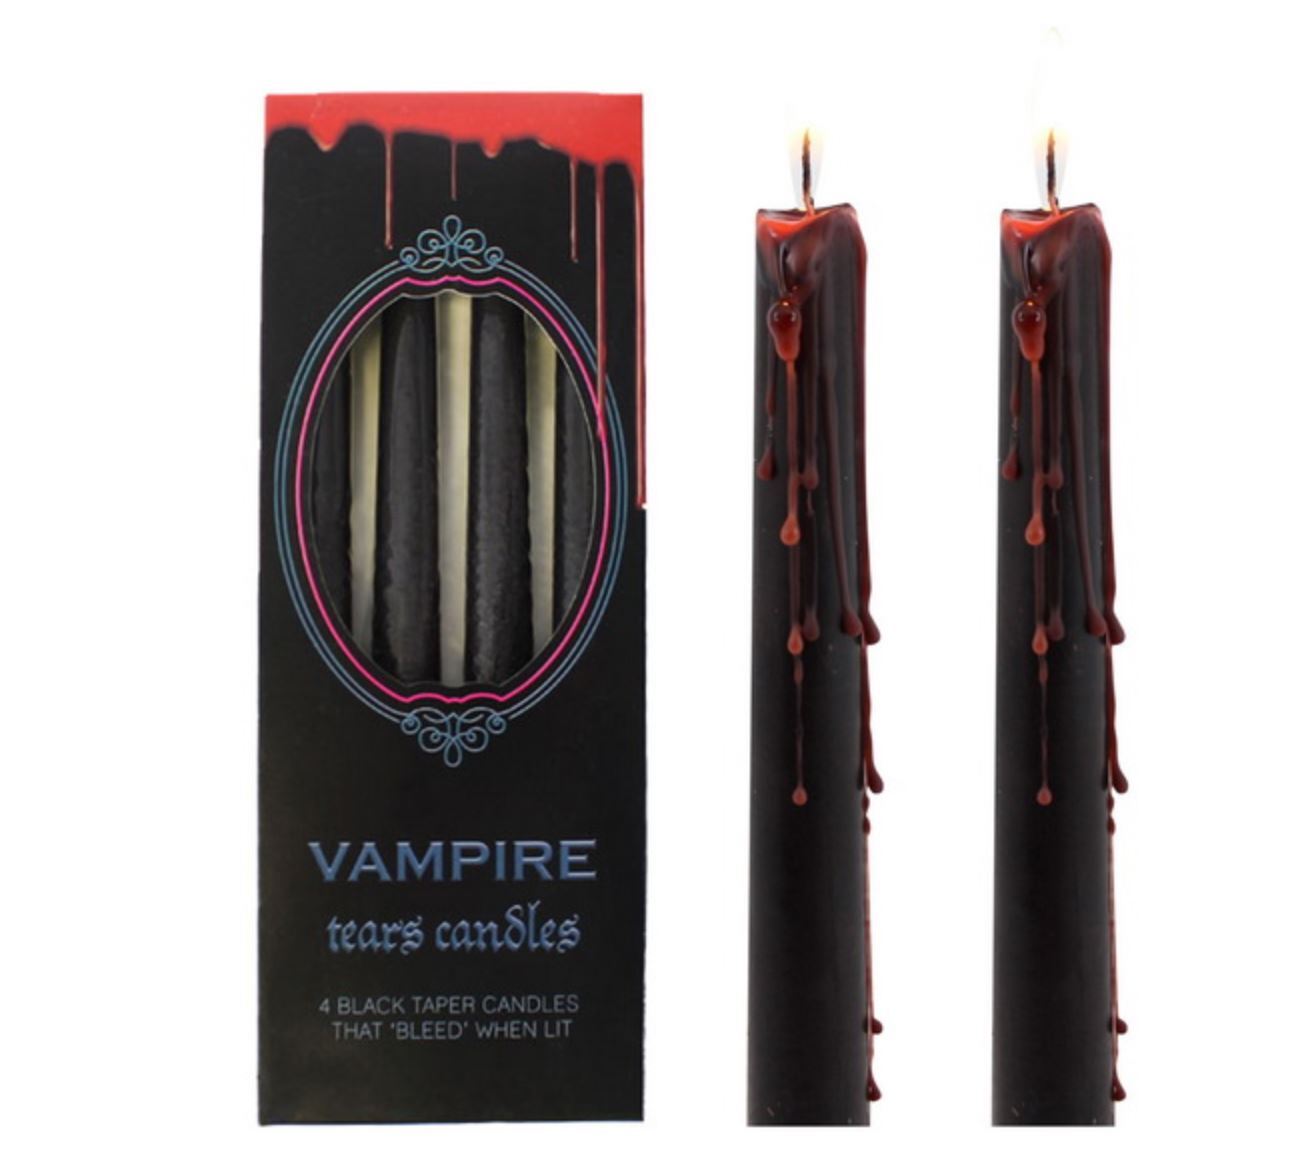 VAMPIRE TEARS CANDLES (BLEEDS RED WAX WHEN BURNING) PACK OF 4 BLACK